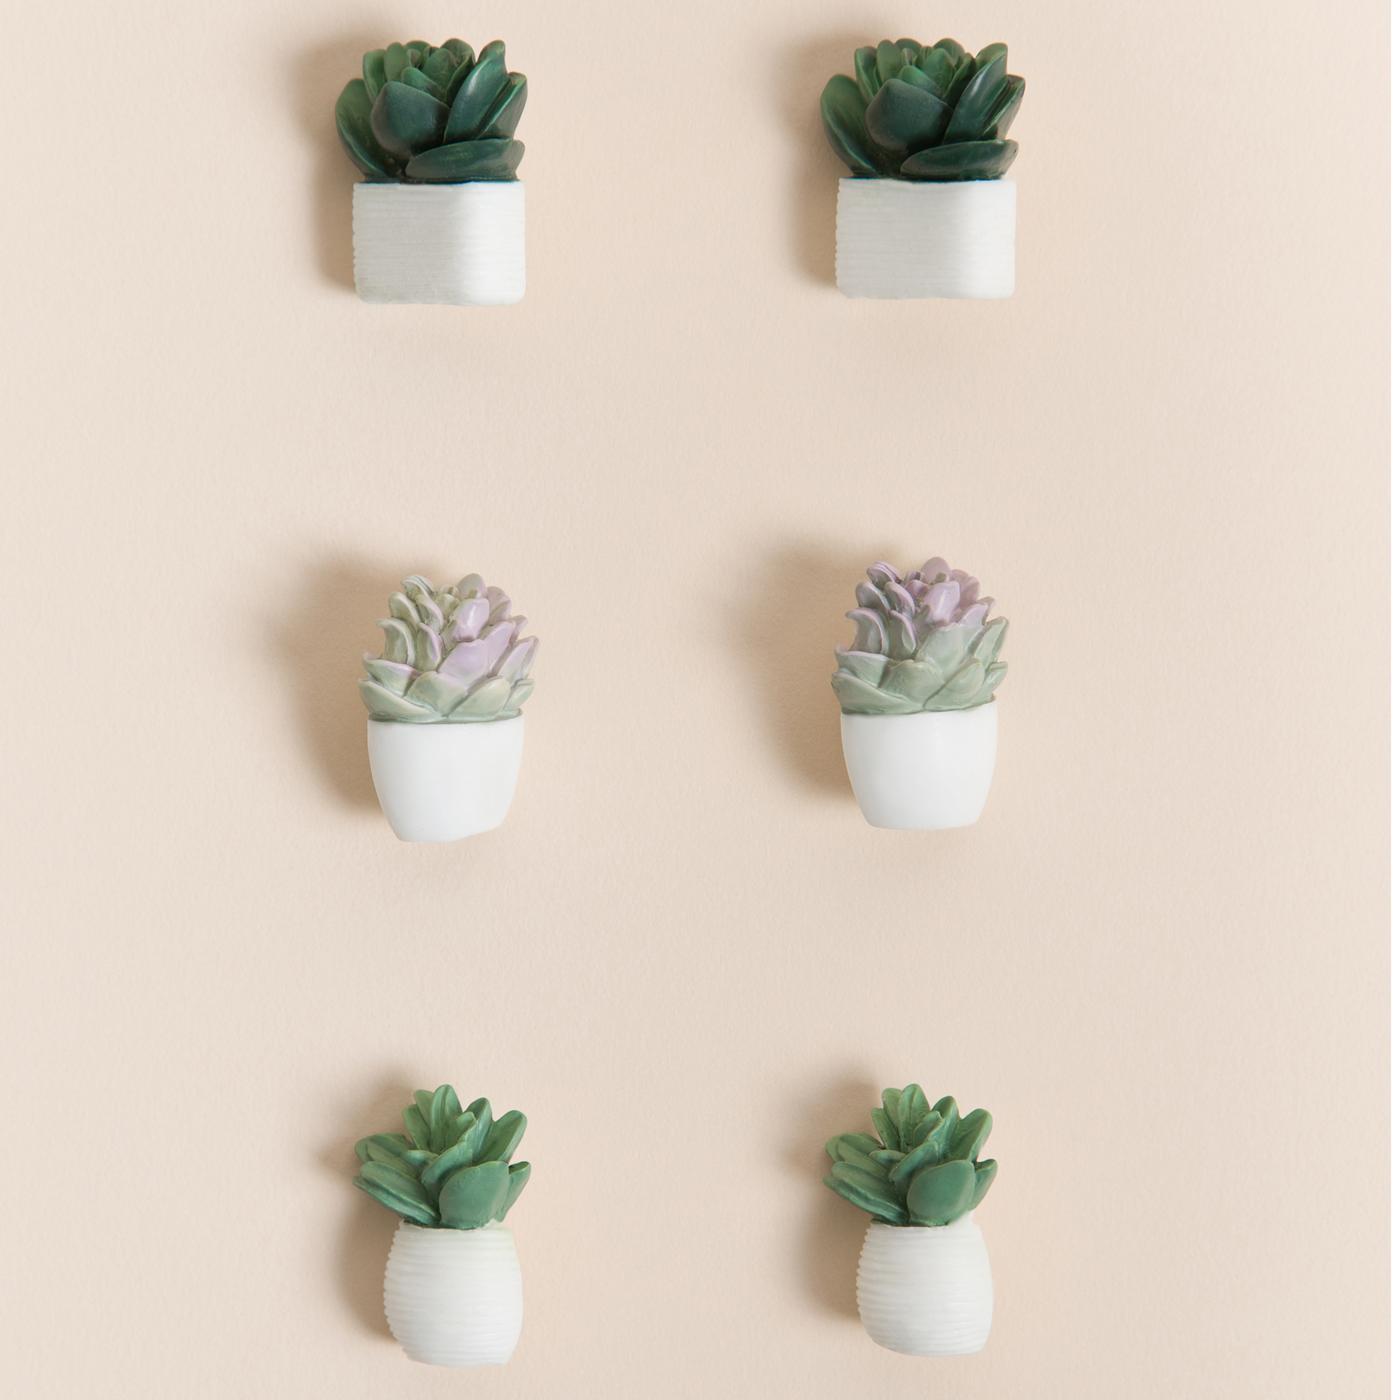 U Brands Potted Succulents Push Pins; image 2 of 2